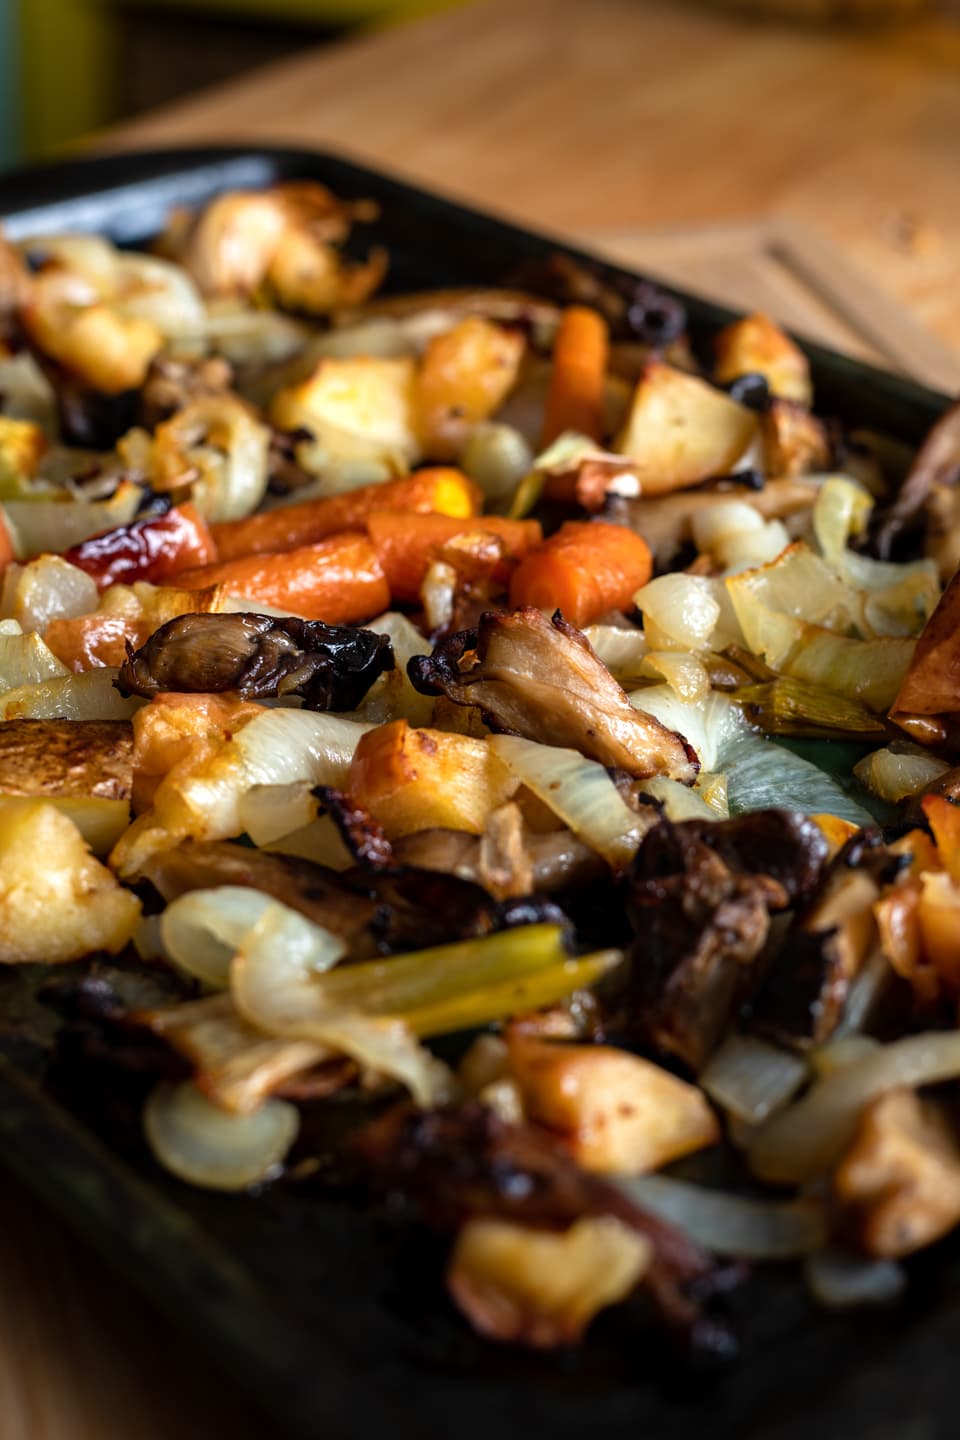 A baking sheet filled with roasted vegetables, mushrooms, and apples